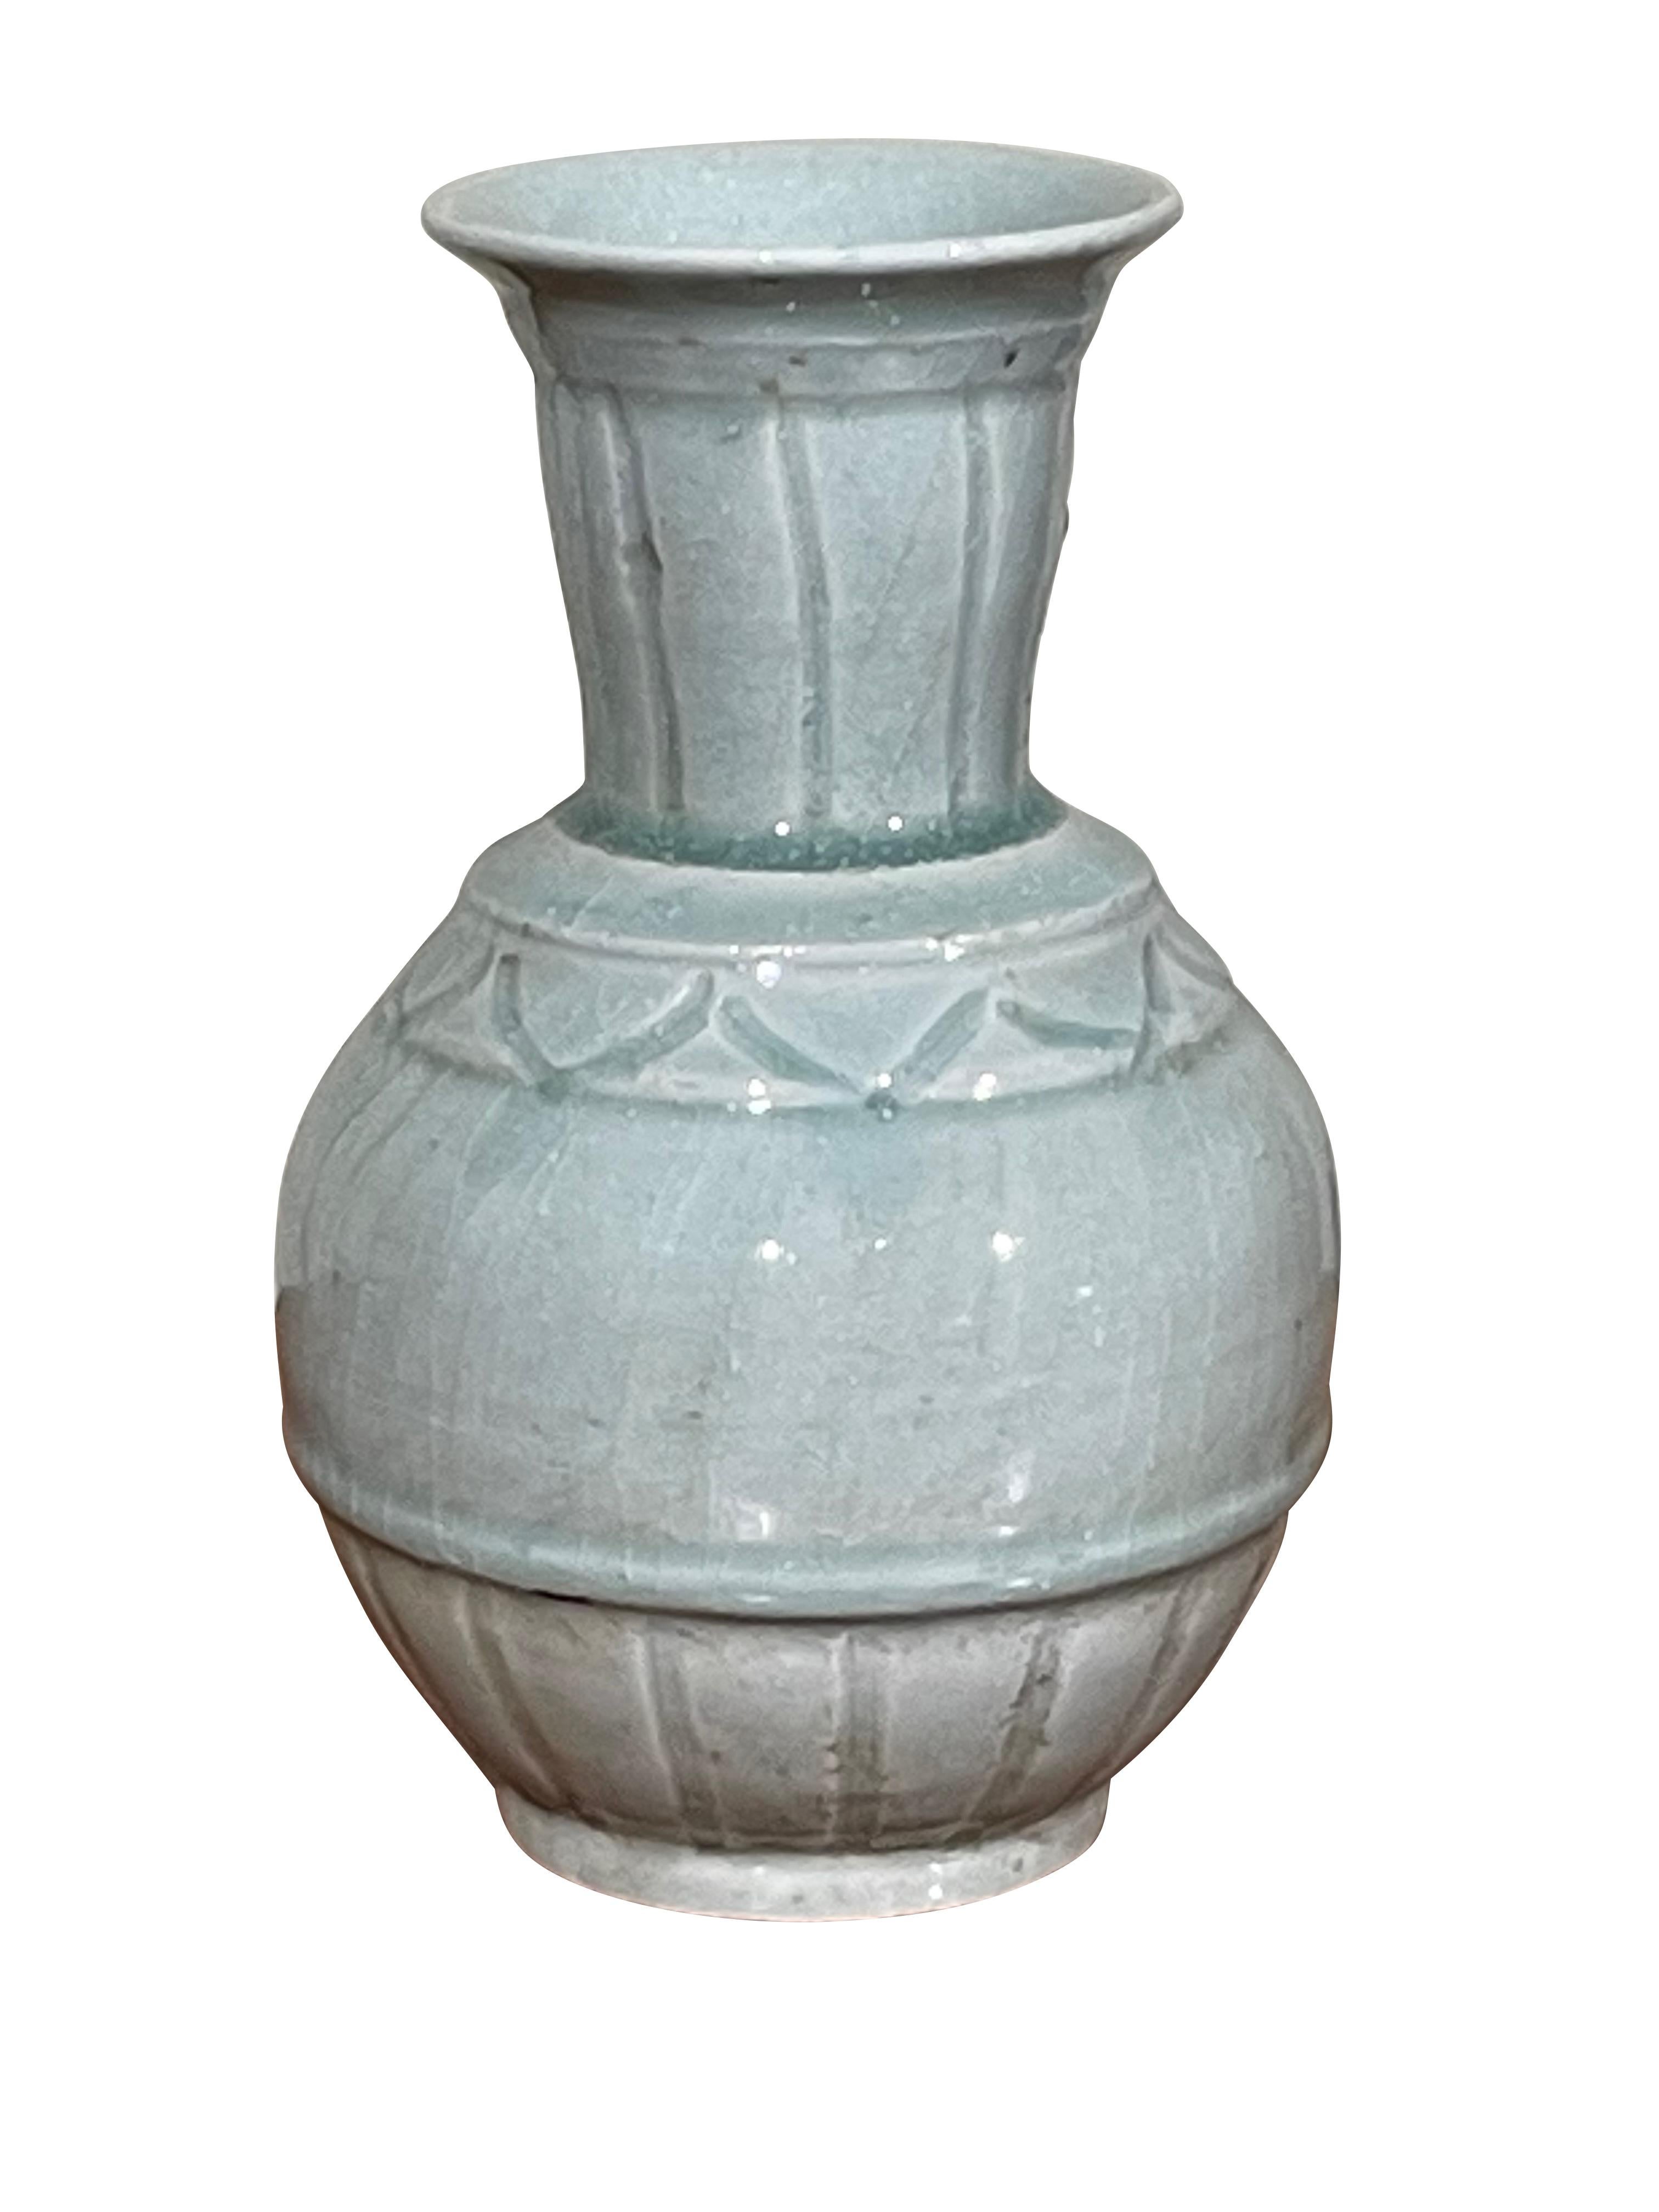 Contemporary Chinese pale turquoise vase.
Decorative design.
From a collection of three pieces sold individually.
ARRIVING APRIL